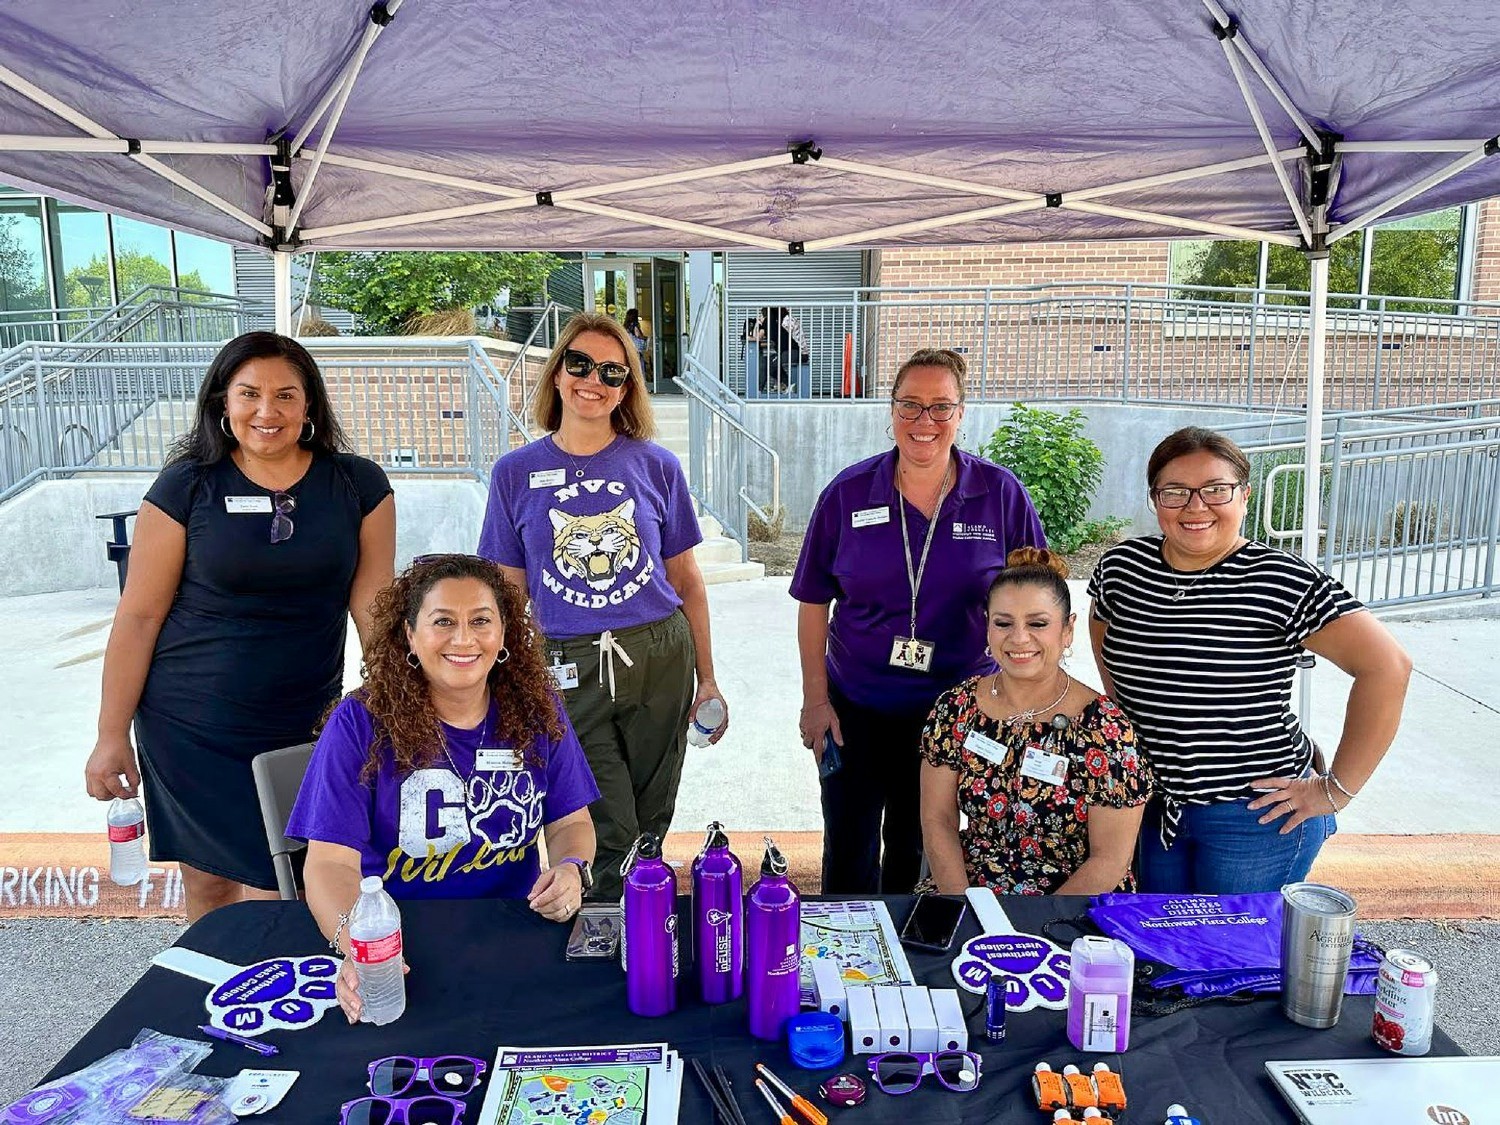 Northwest Vista College leaders host a welcome booth for students during their first week on campus